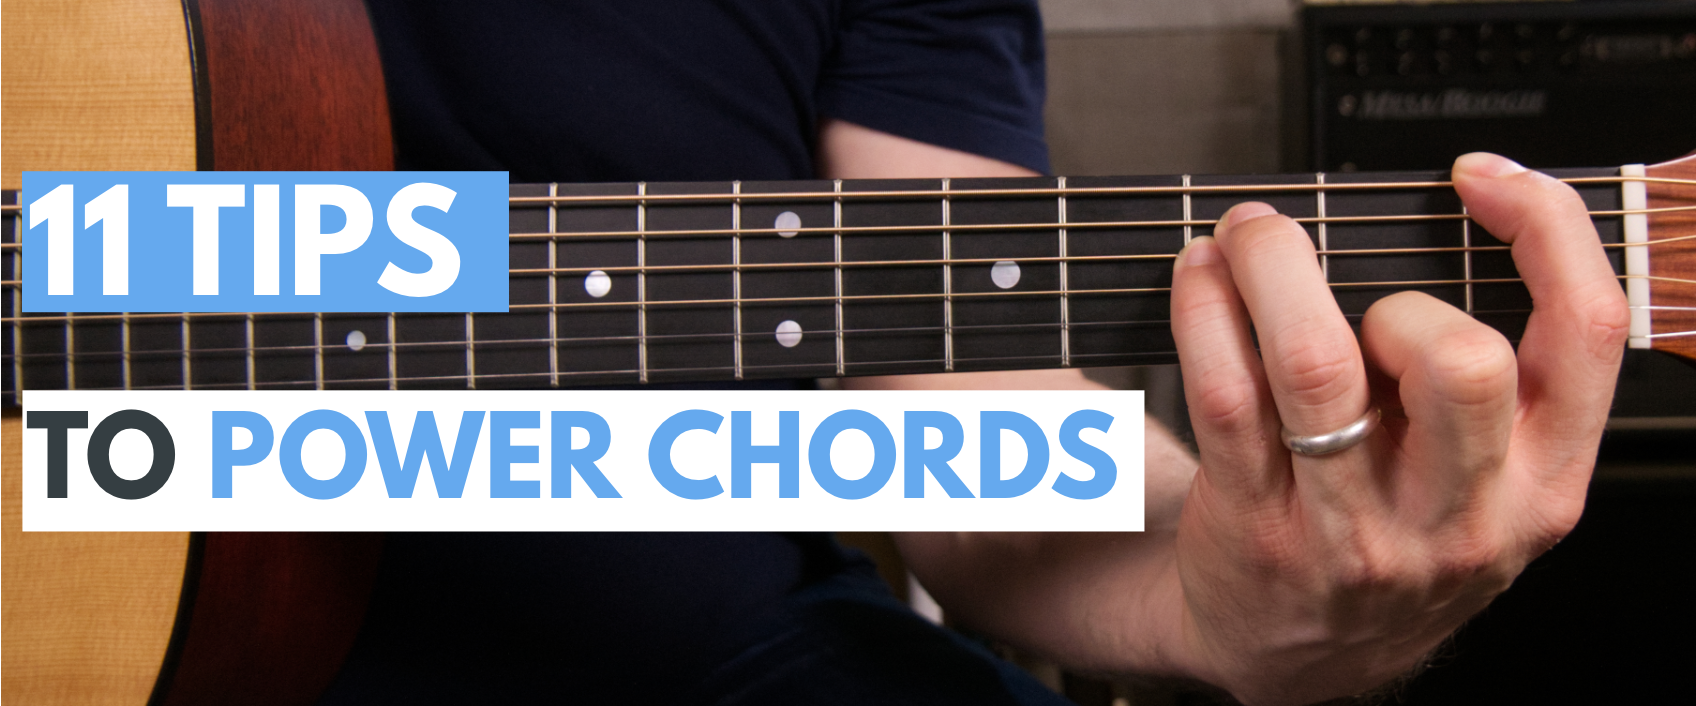 15 Alternative/Indie Songs for Guitar with Chords